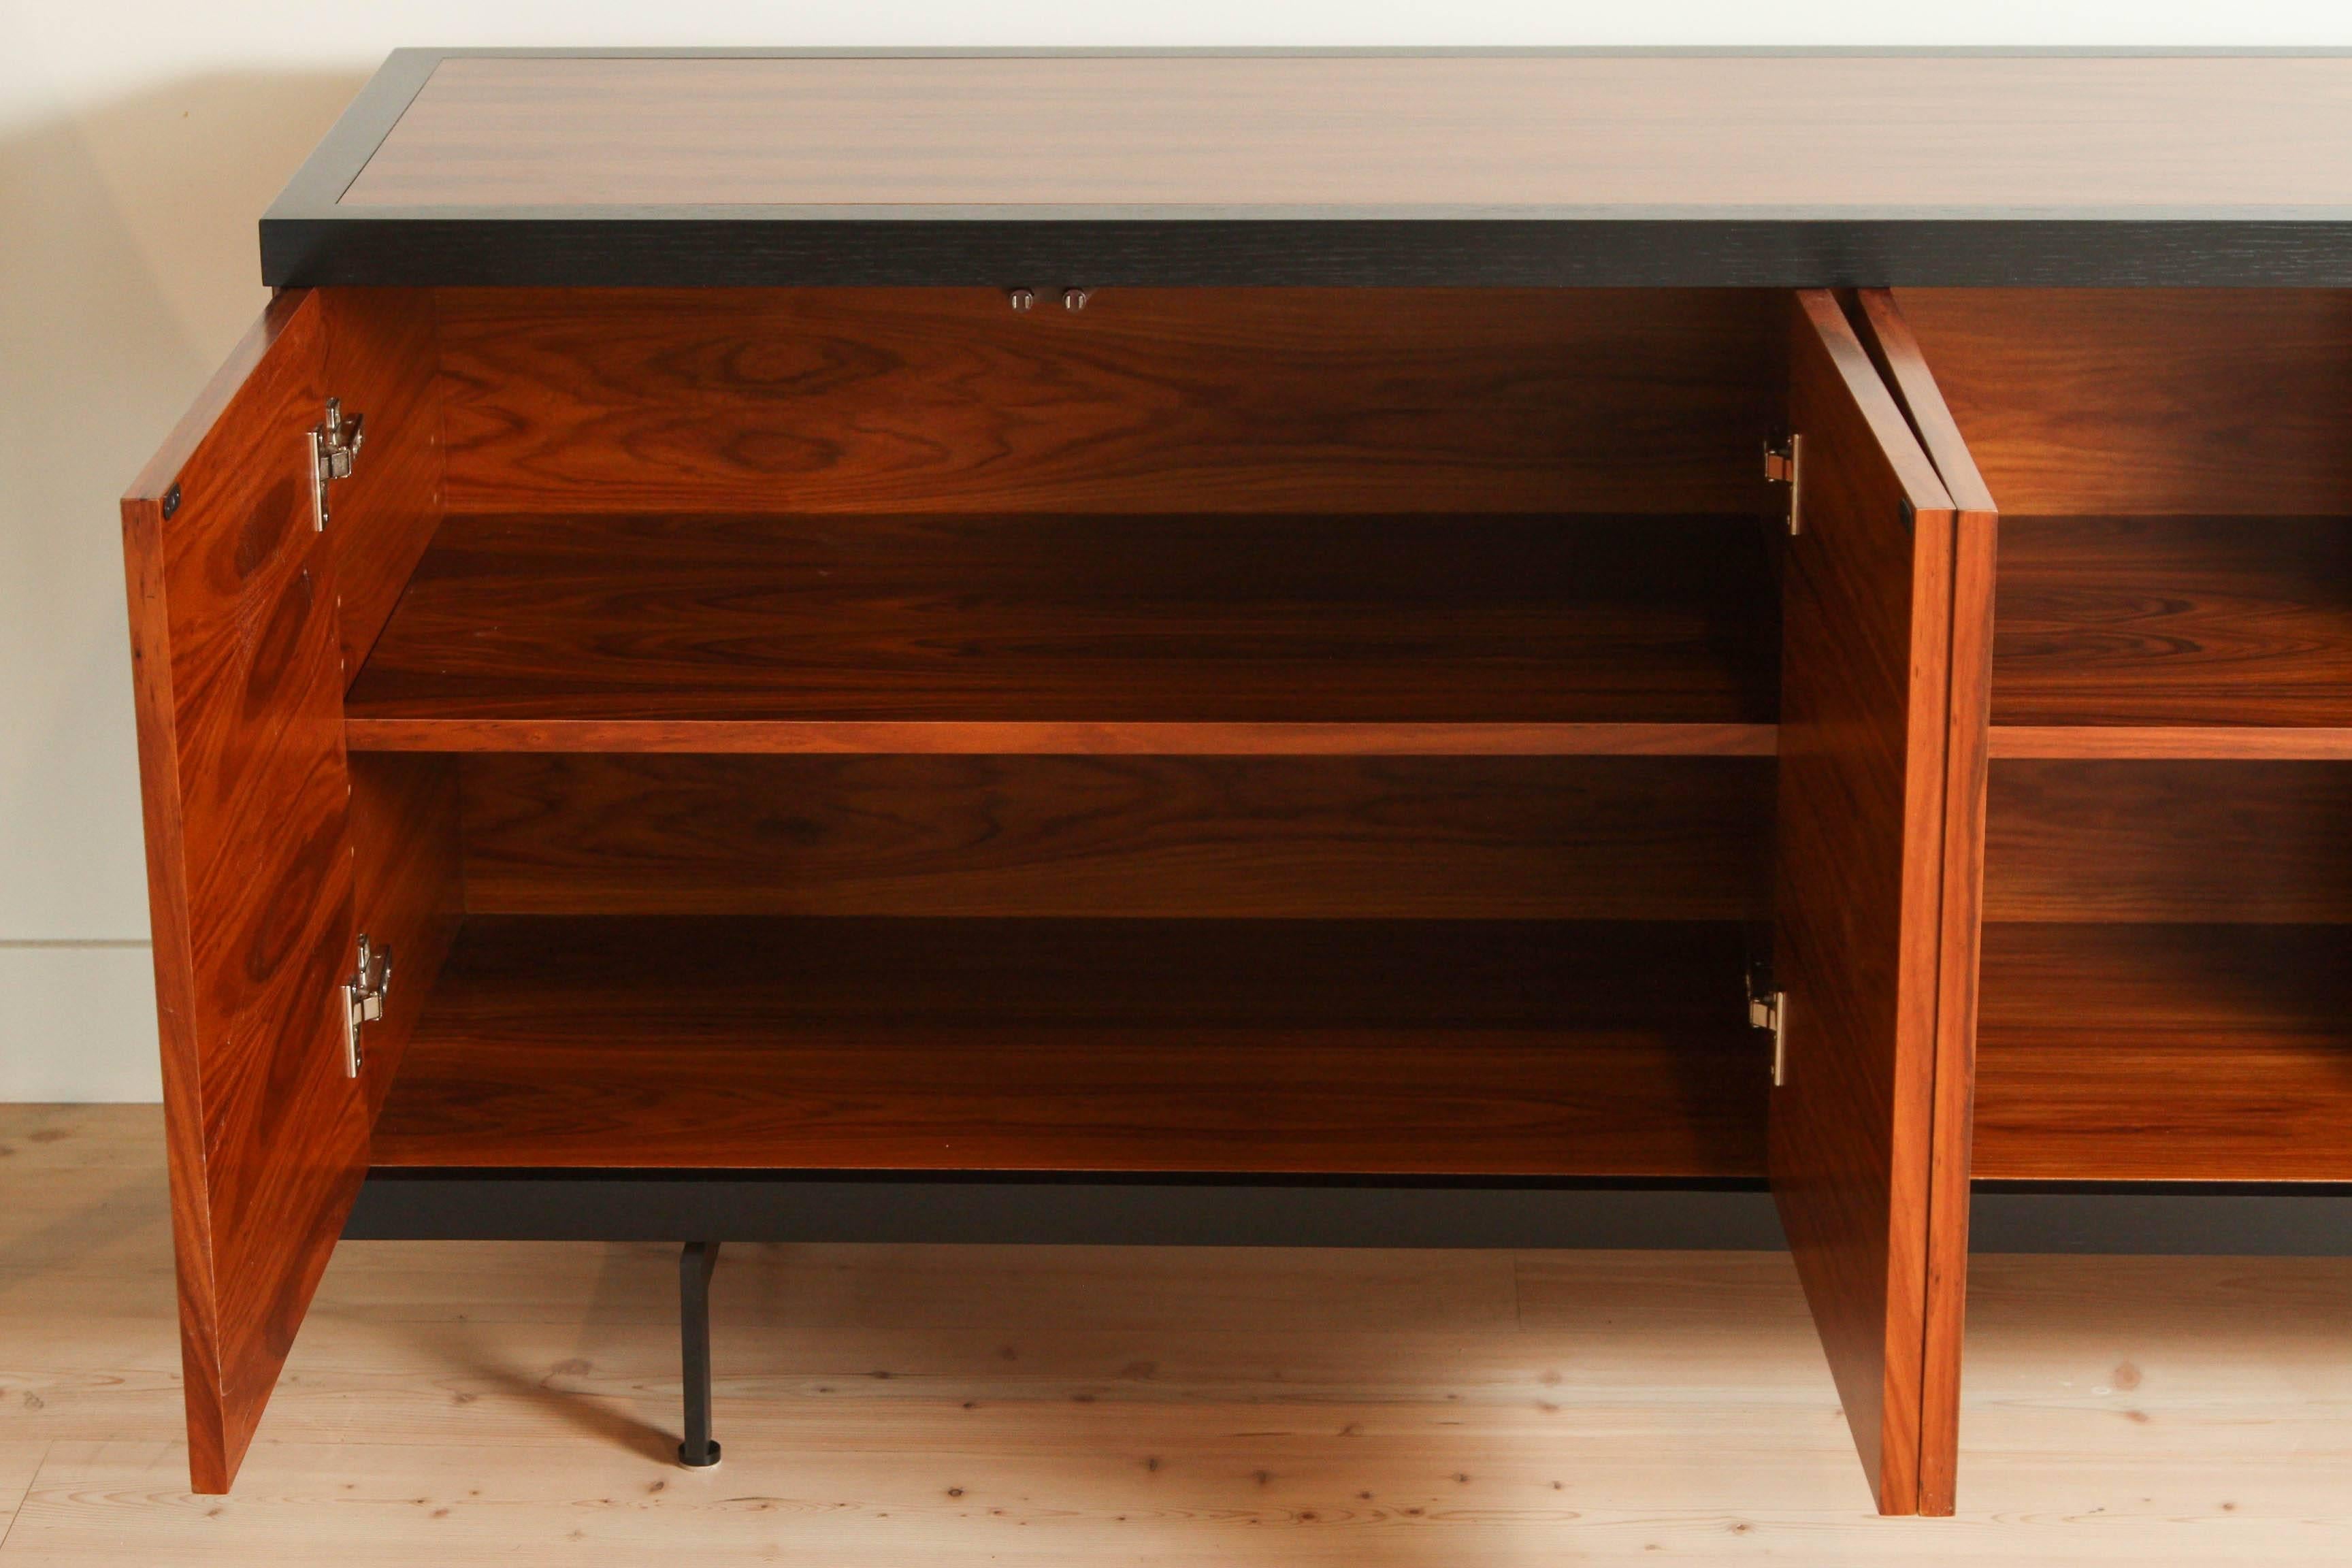 Four-Door Rosewood Dimas Cabinet by Lawson-Fenning 1